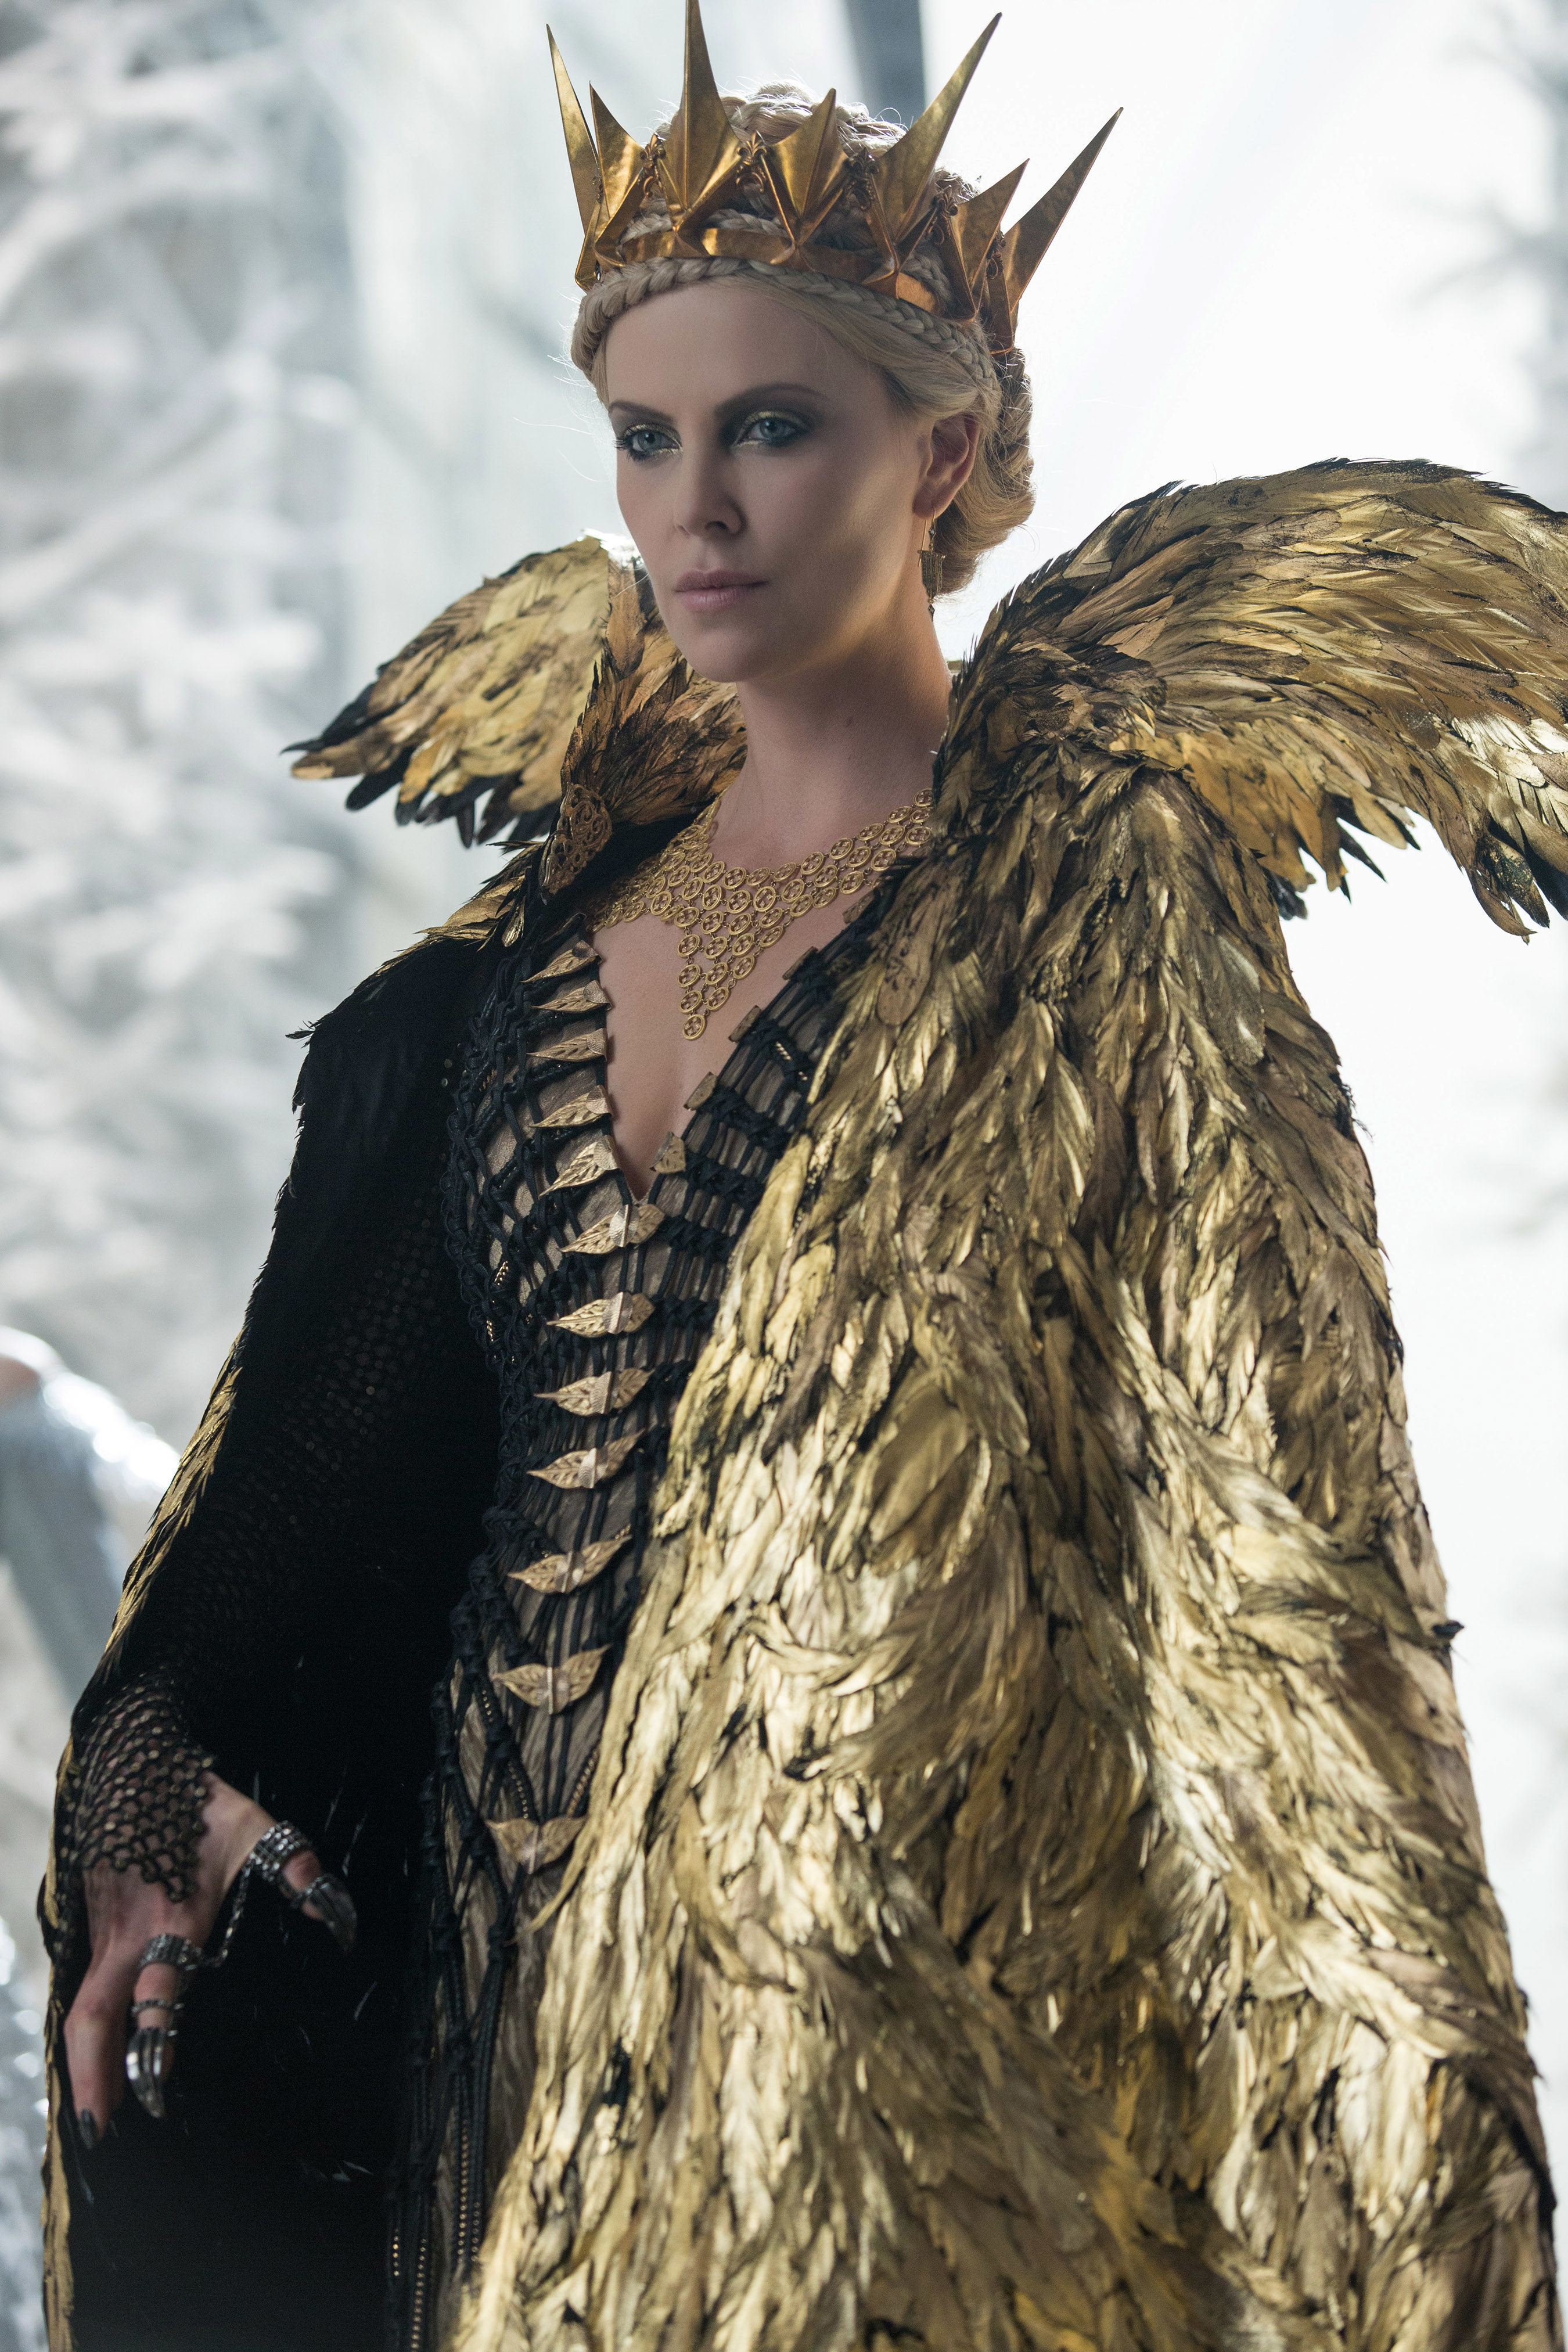 charlize in character in a long feathery robe